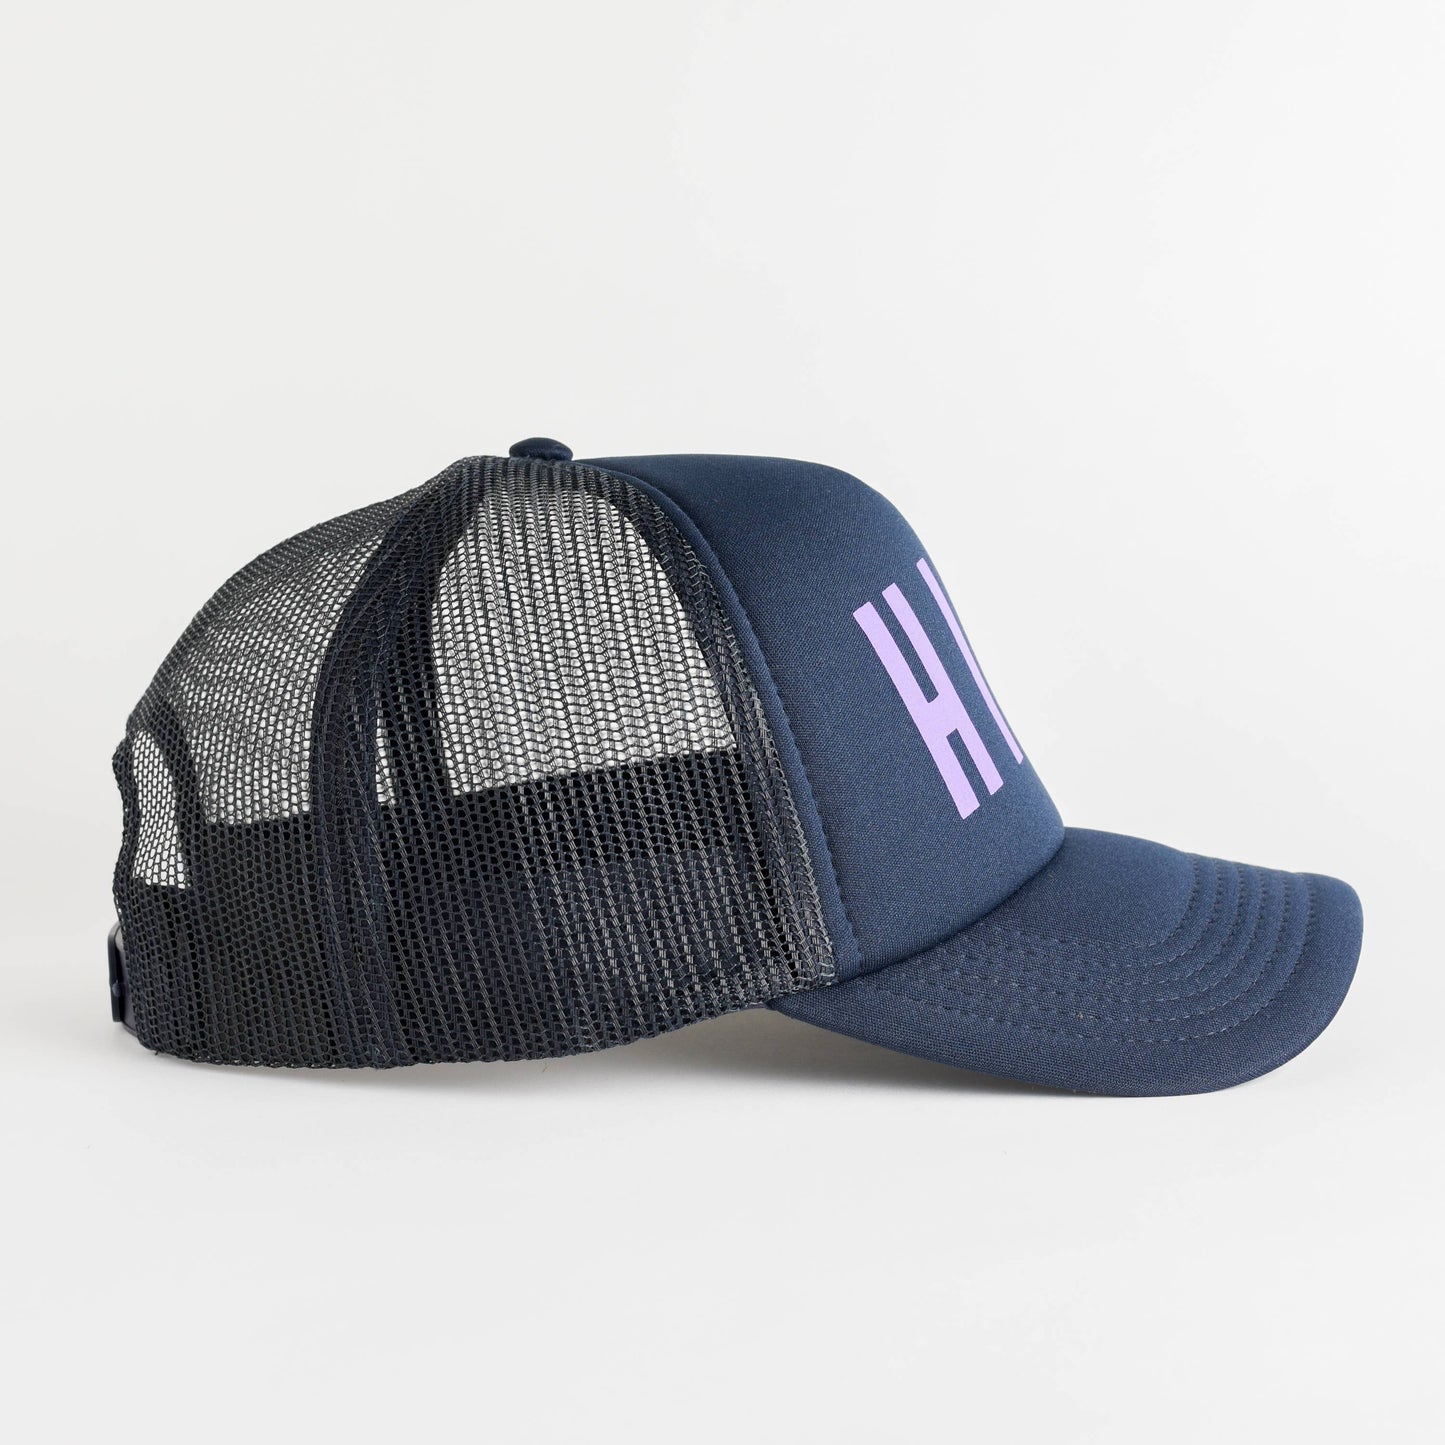 Hike Recycled Woman's Trucker Hat - navy